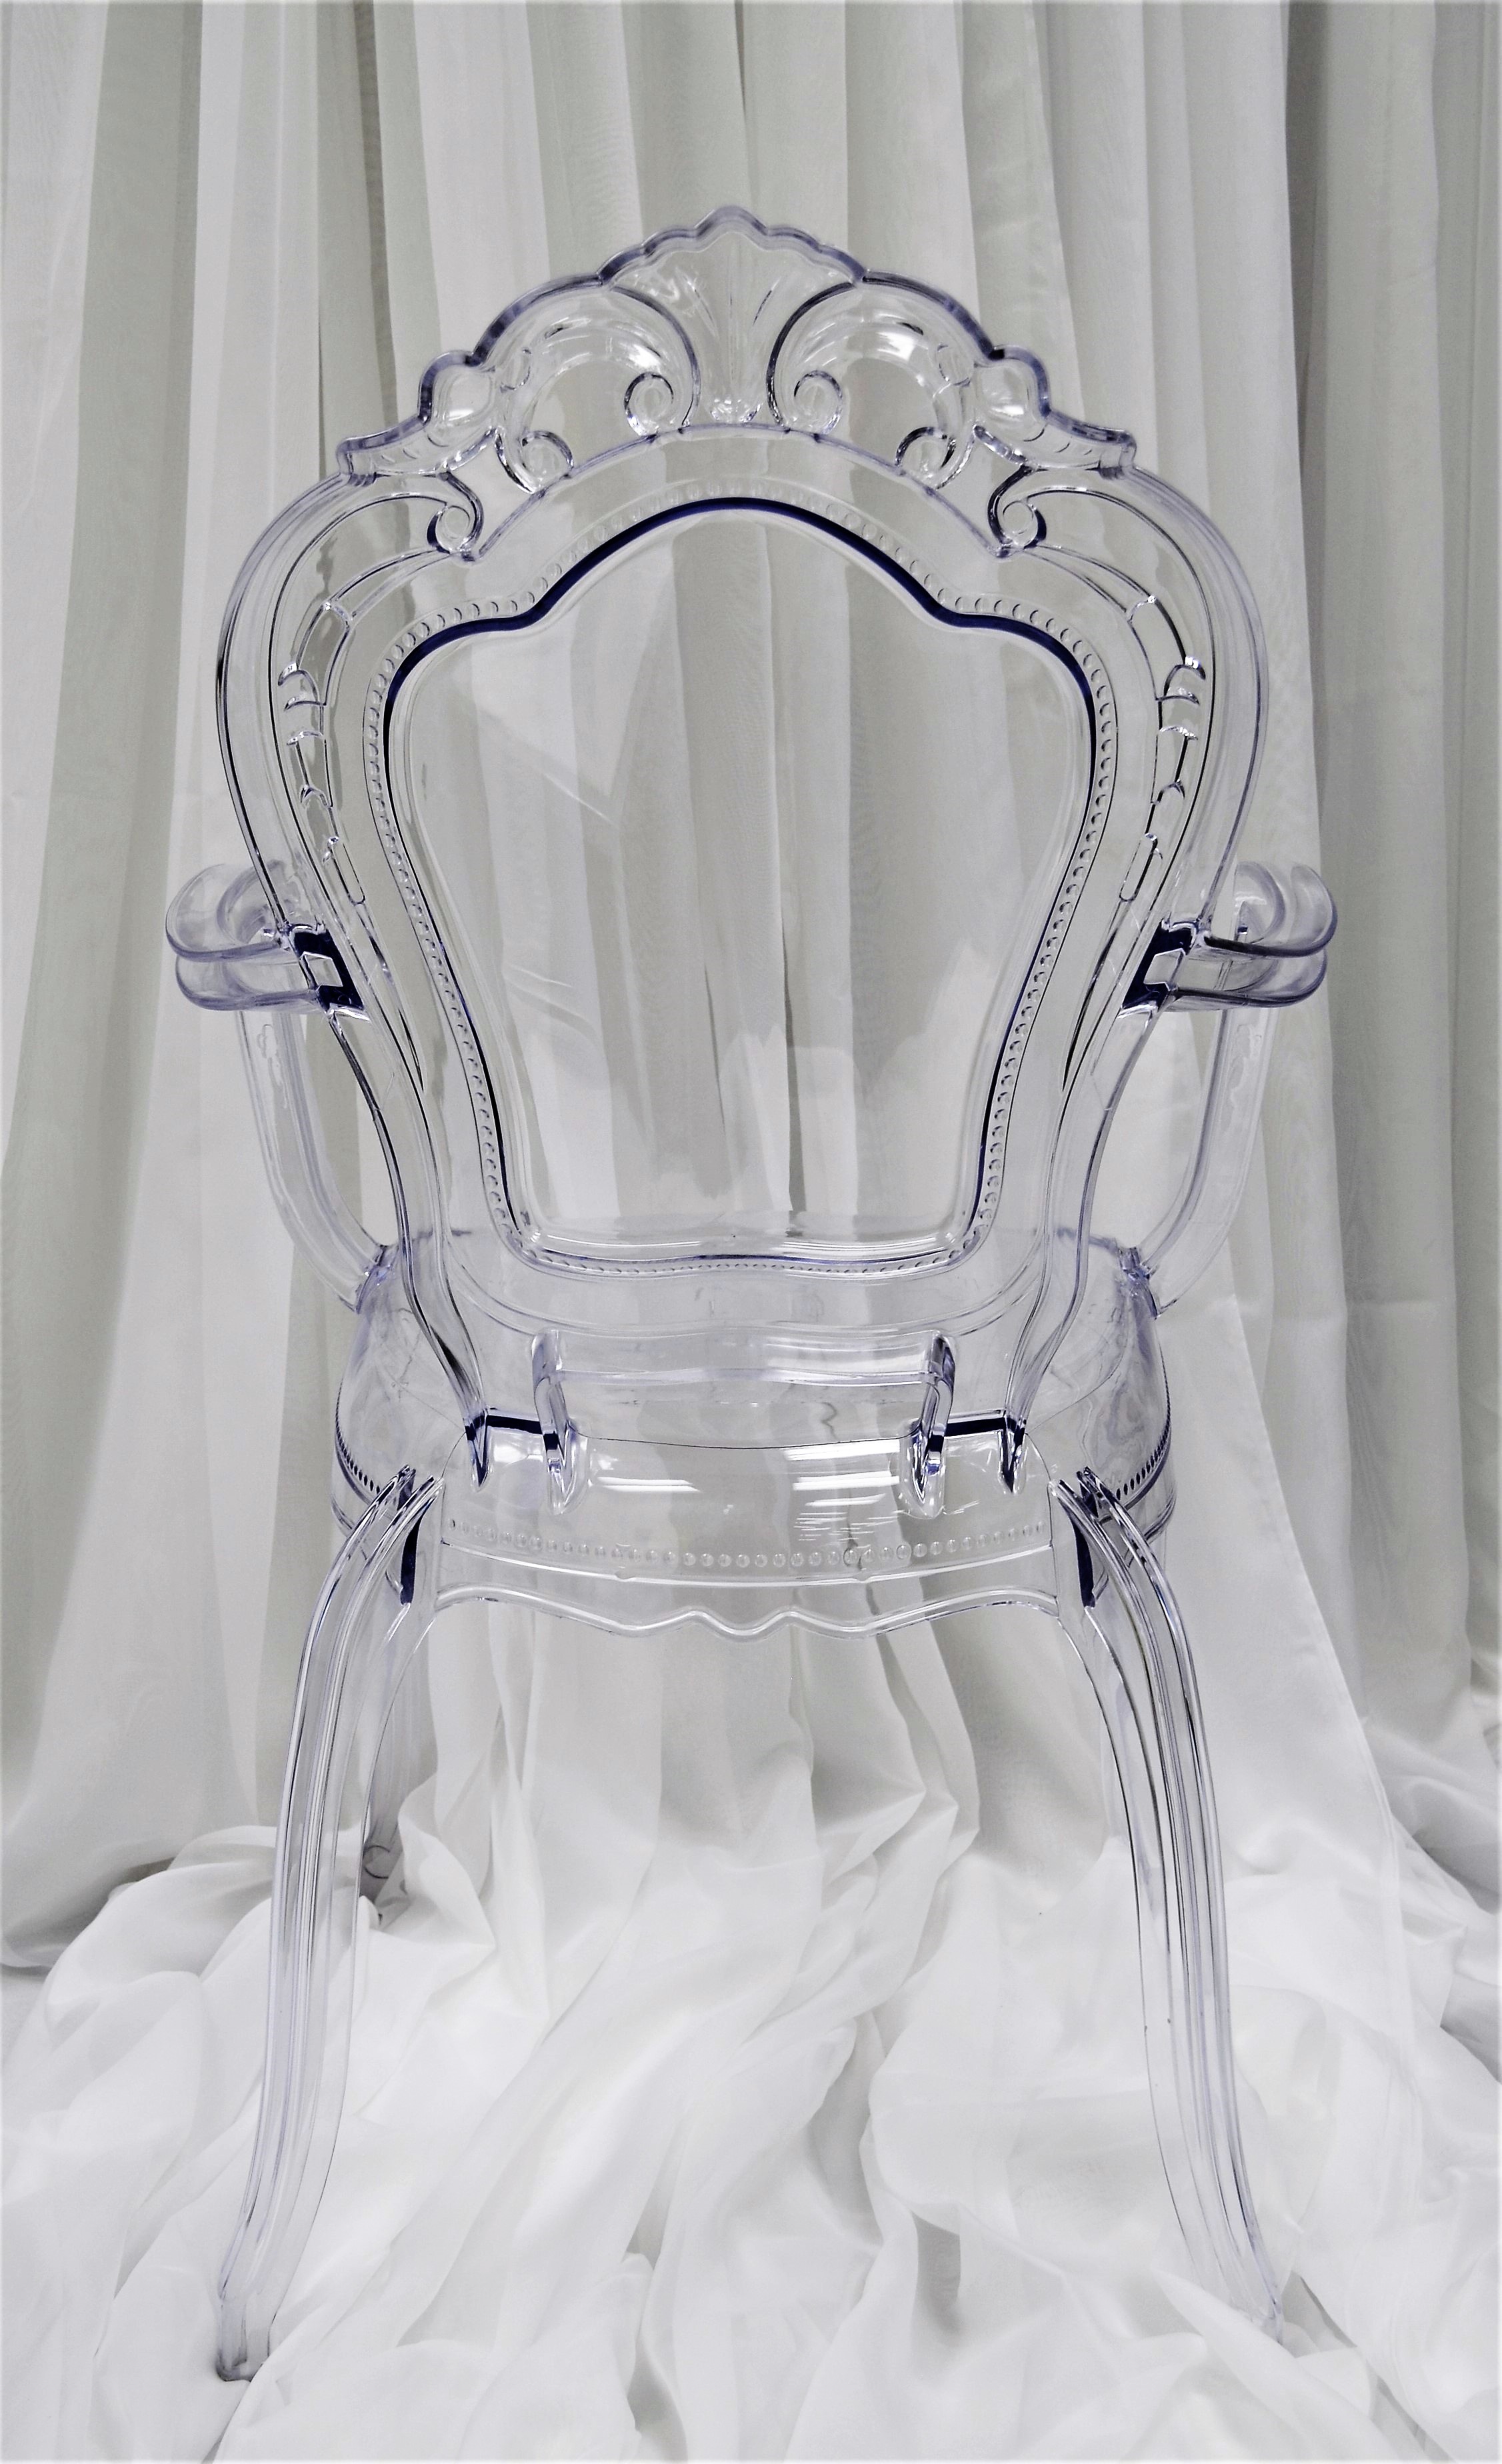 BELLA "HORA" CHAIR WITH ARMS